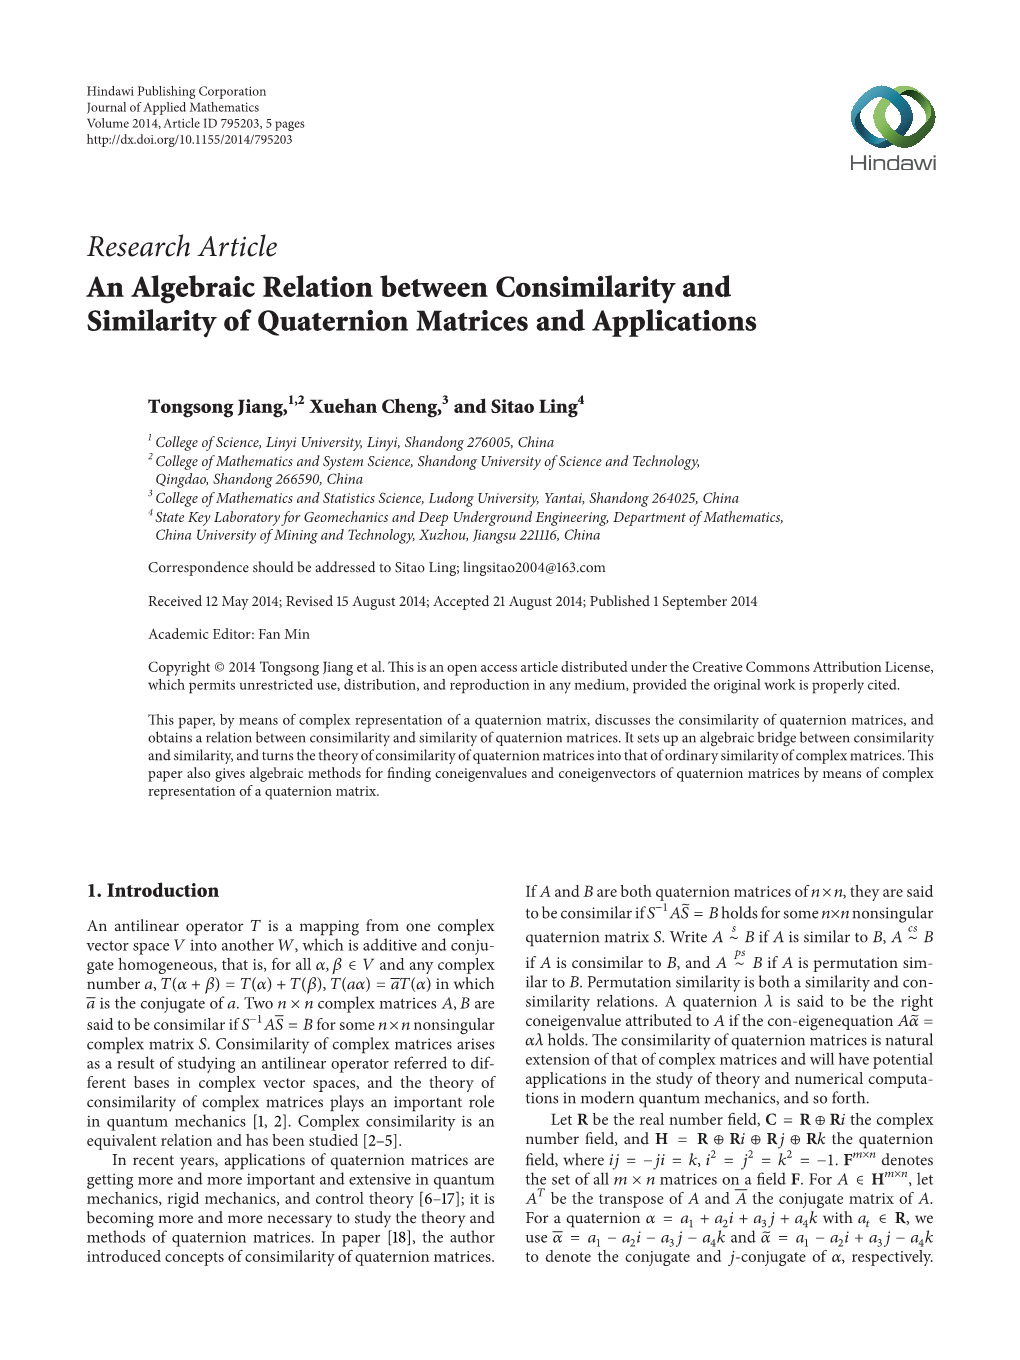 An Algebraic Relation Between Consimilarity and Similarity of Quaternion Matrices and Applications